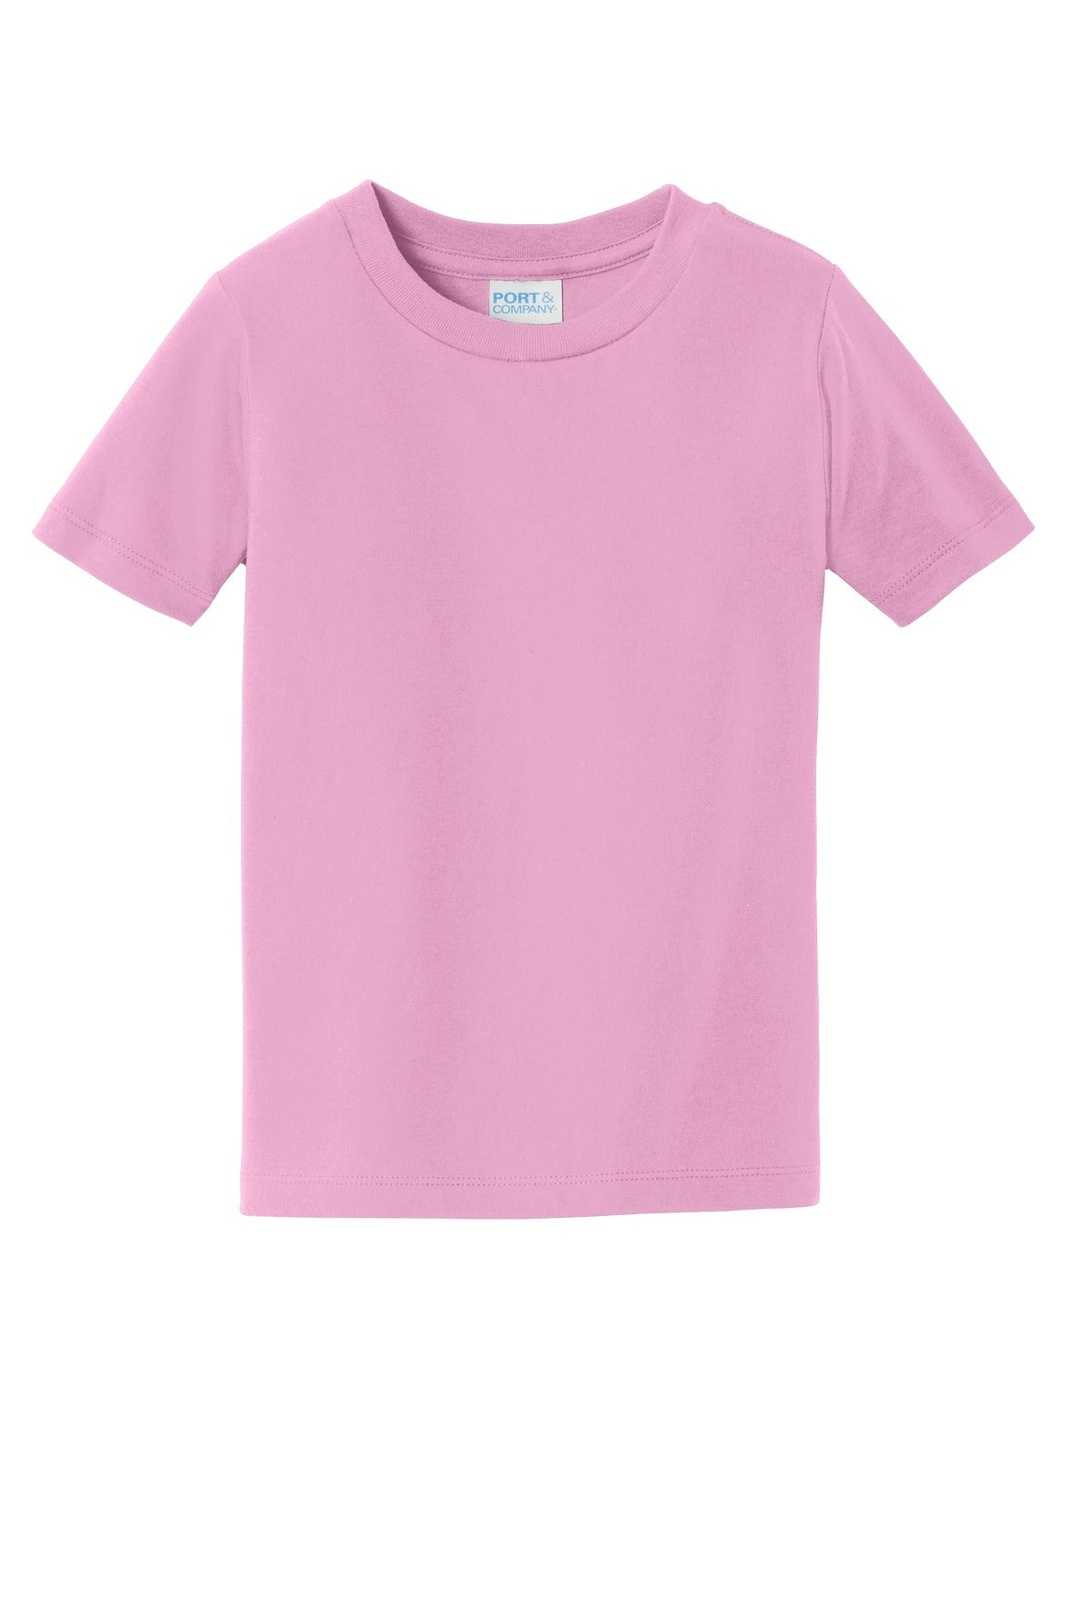 Port & Company PC450TD Toddler Fan Favorite Tee - Candy Pink - HIT a Double - 1